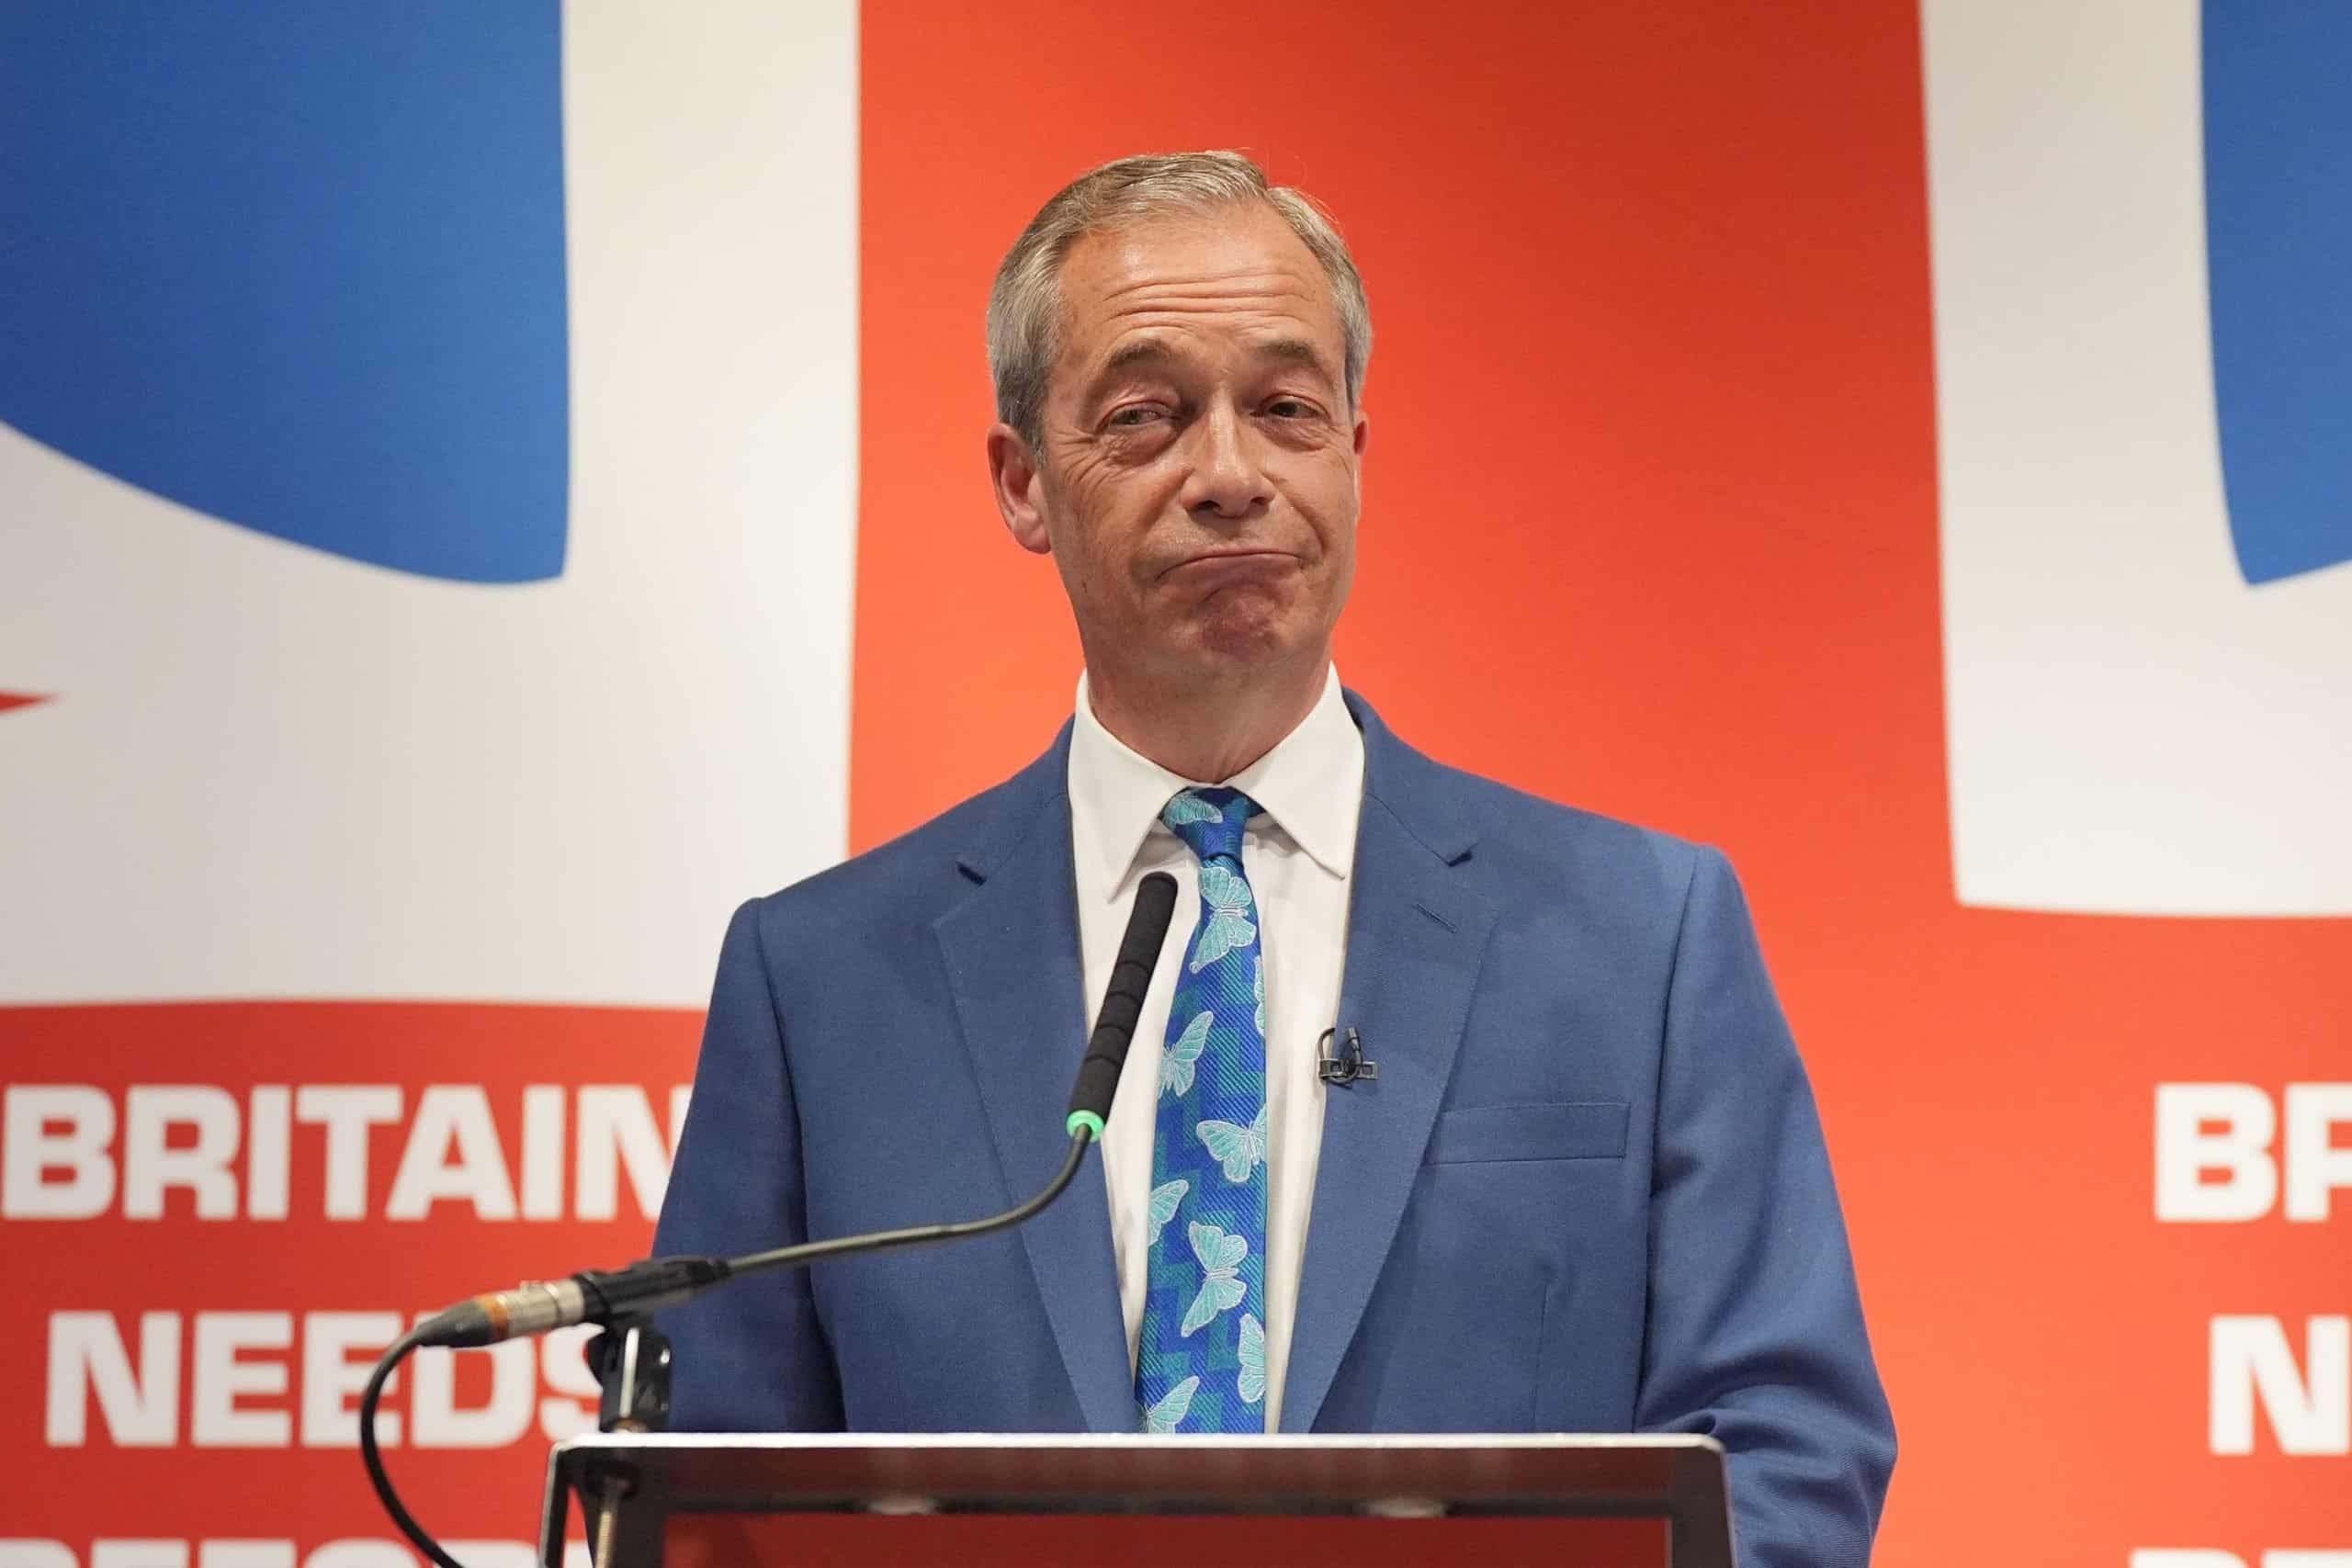 Another election, another round of Nigel Farage hype, with no lessons learned